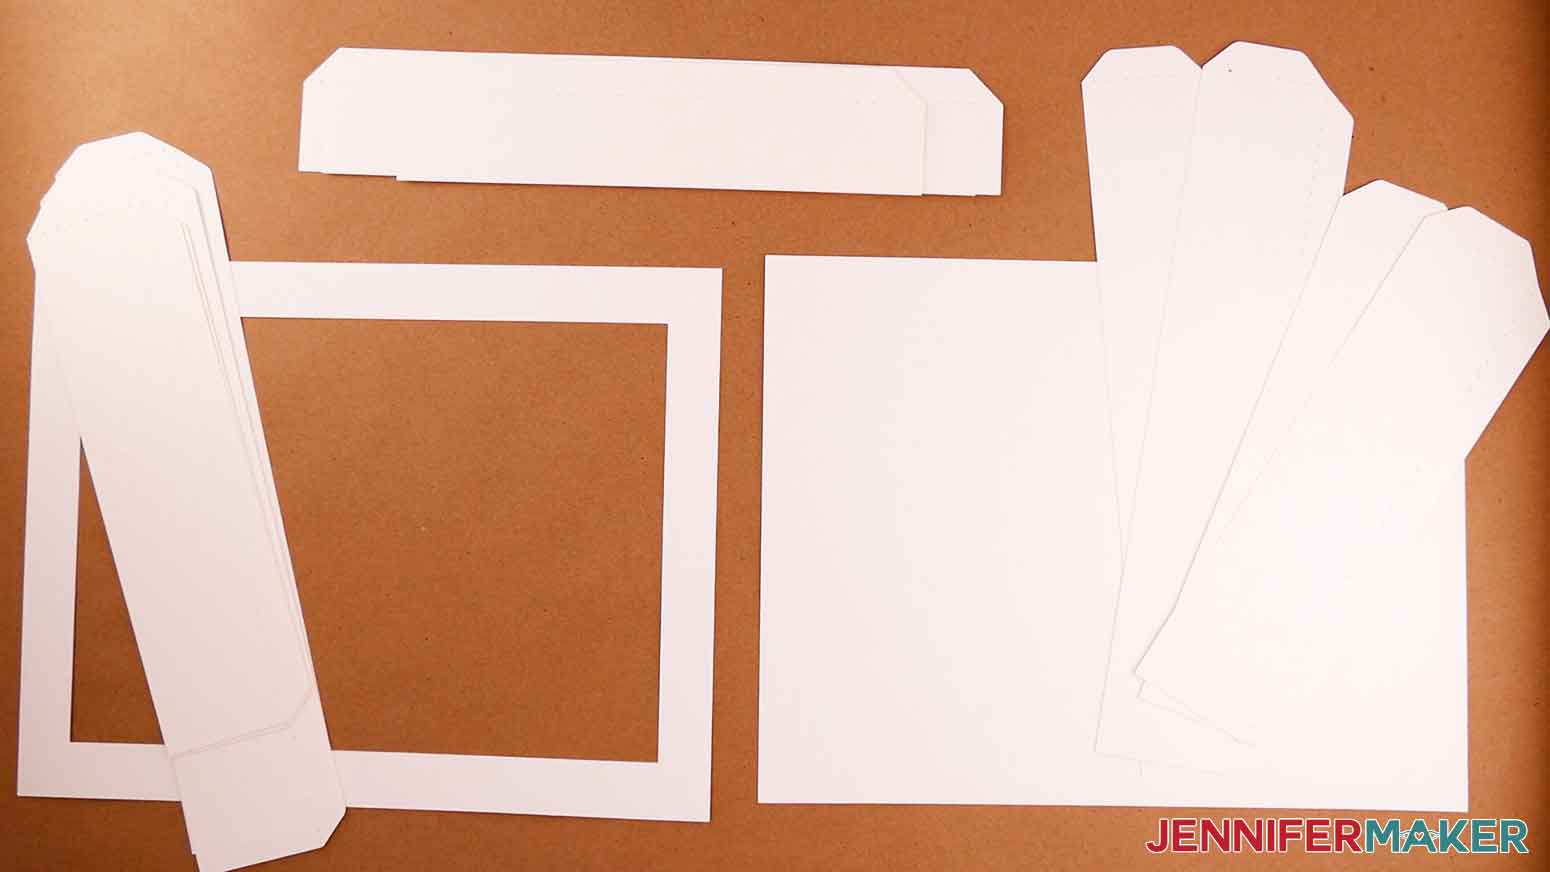 The cut pieces for the DIY cardstock frame for the paper cut light box tutorial